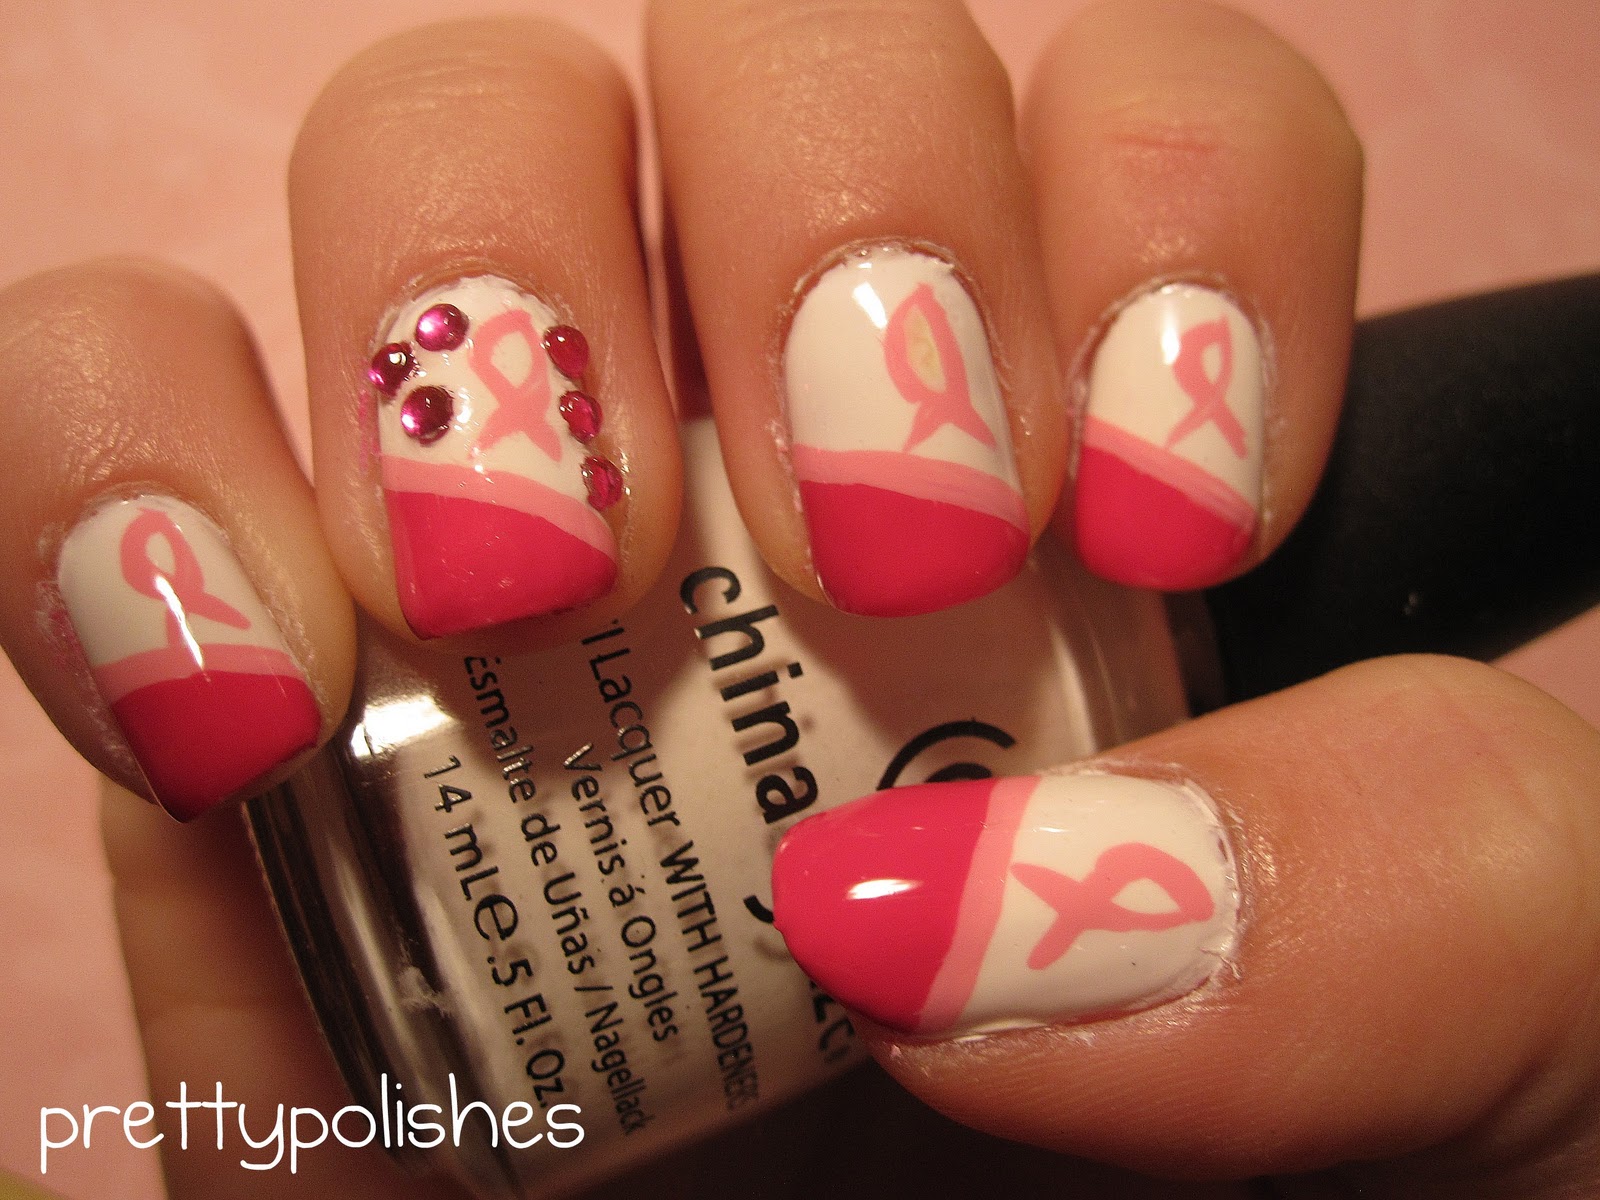 2. Breast Cancer Awareness Nail Art - wide 6